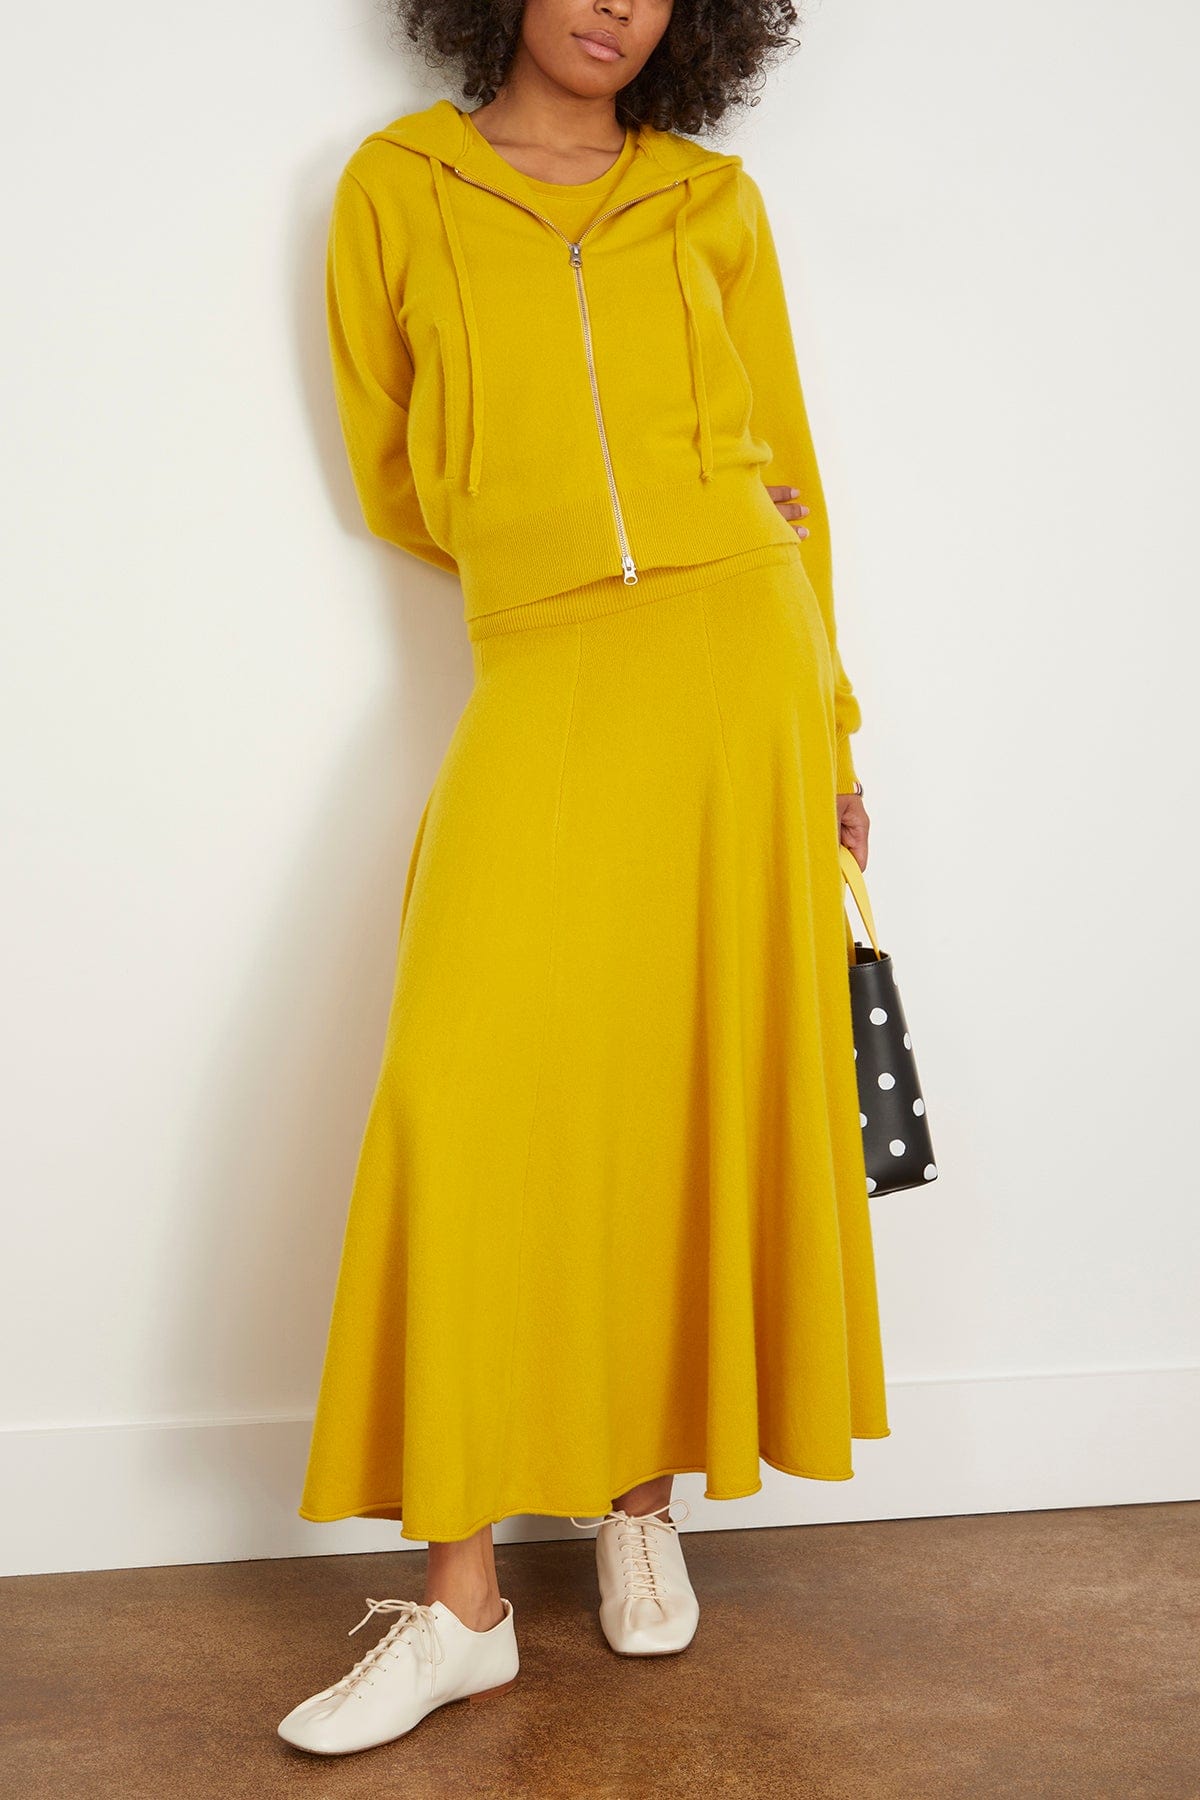 Extreme Cashmere Skirts Twirl Skirt in Sunflower Extreme Cashmere Twirl Skirt in Sunflower